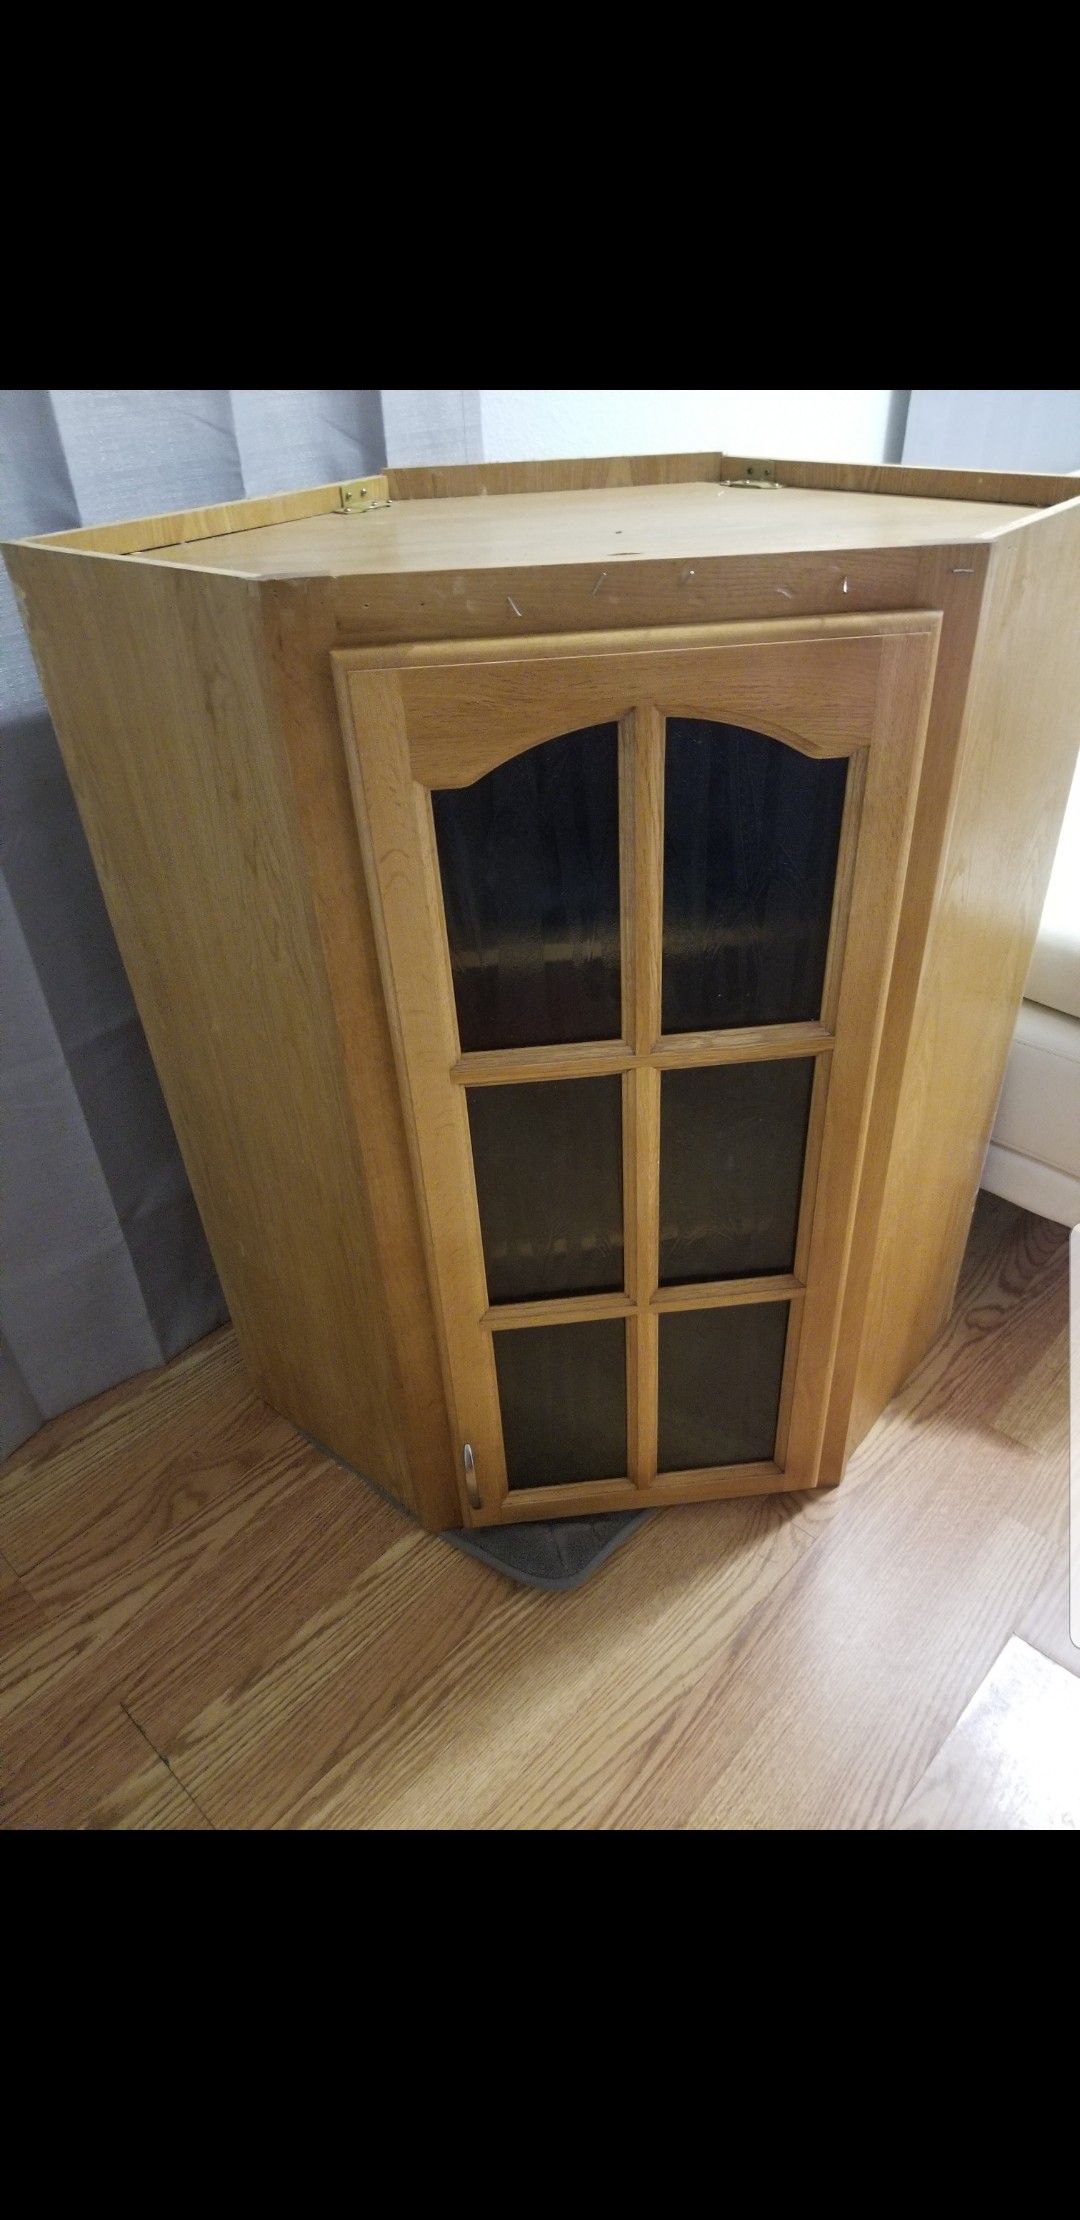 Used good condition cabinets for kitchen